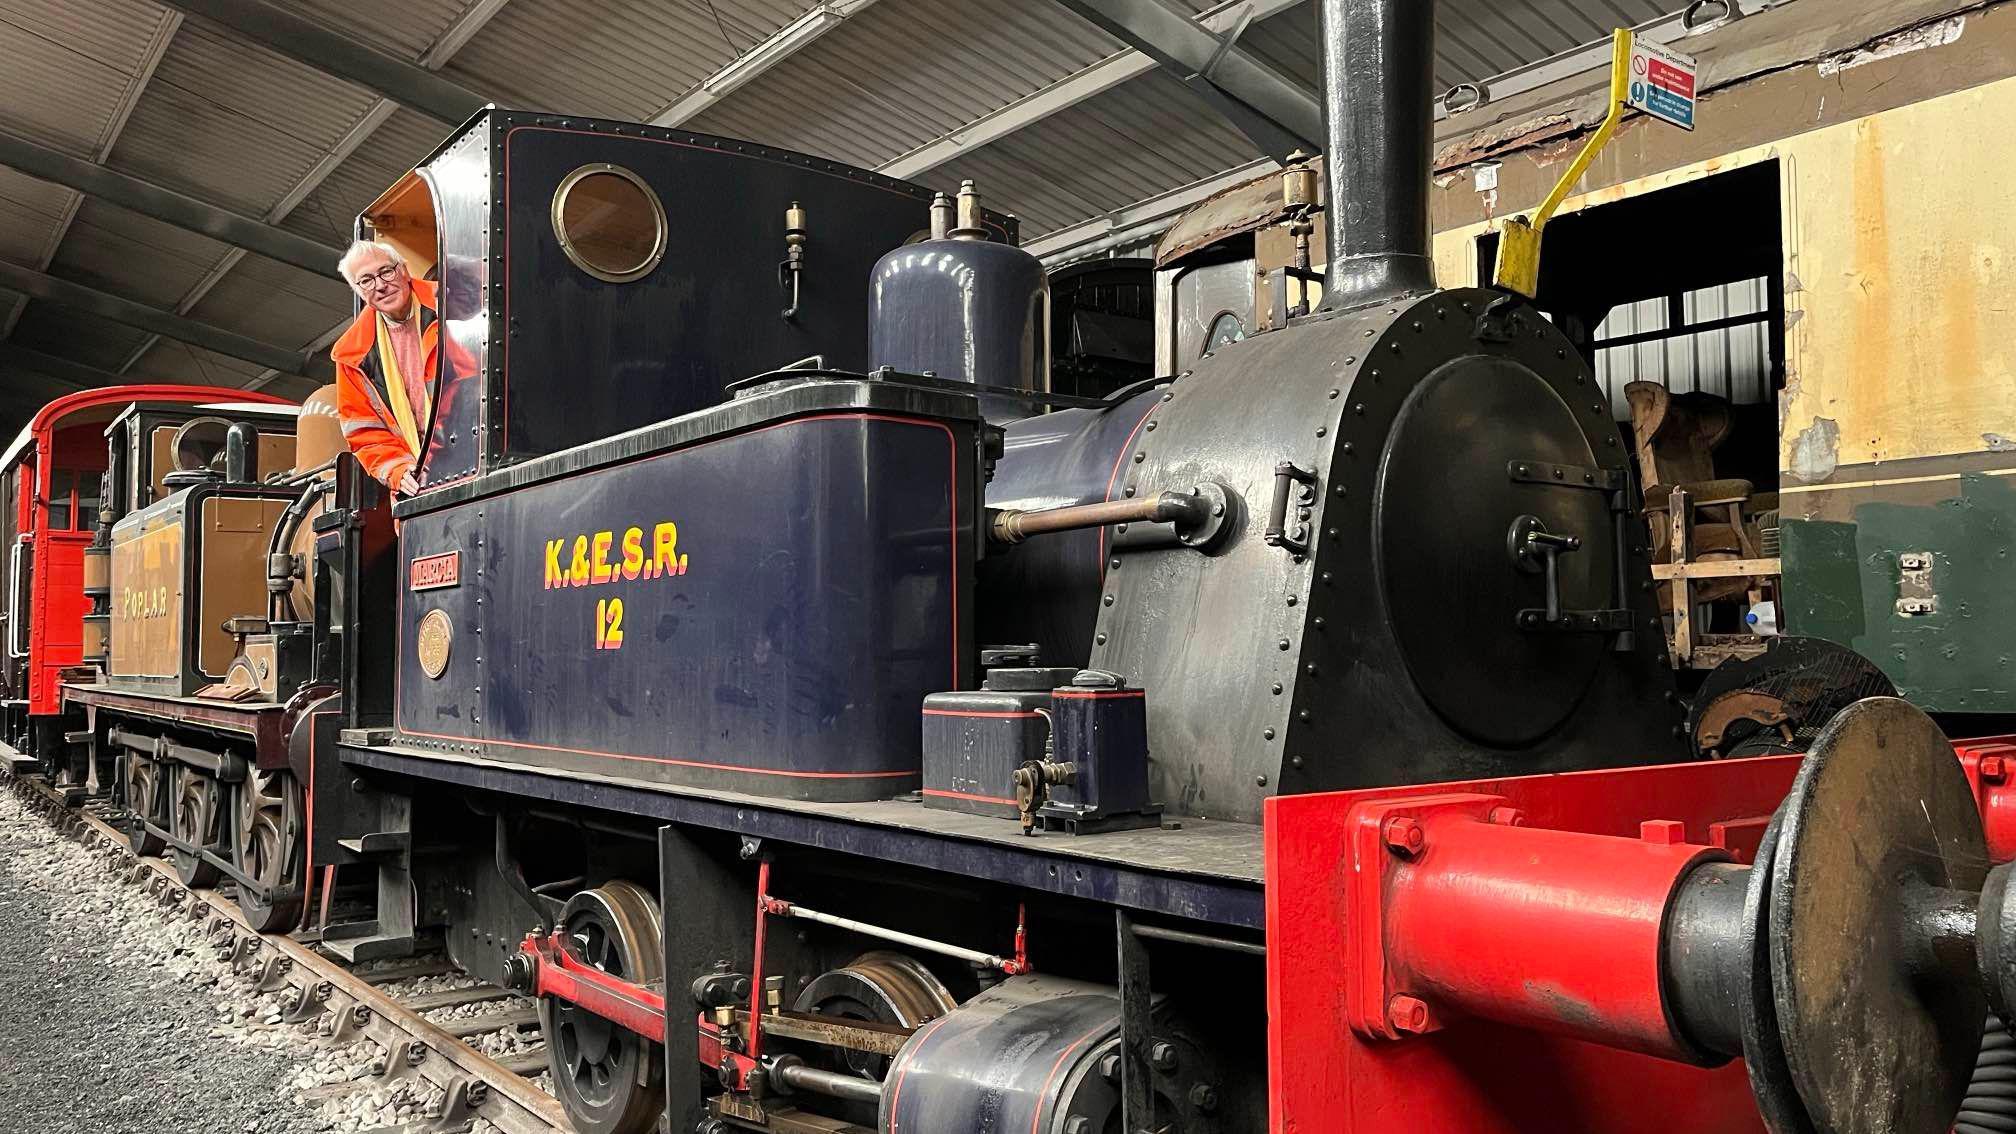 restored historic steam locomotive to be auctioned